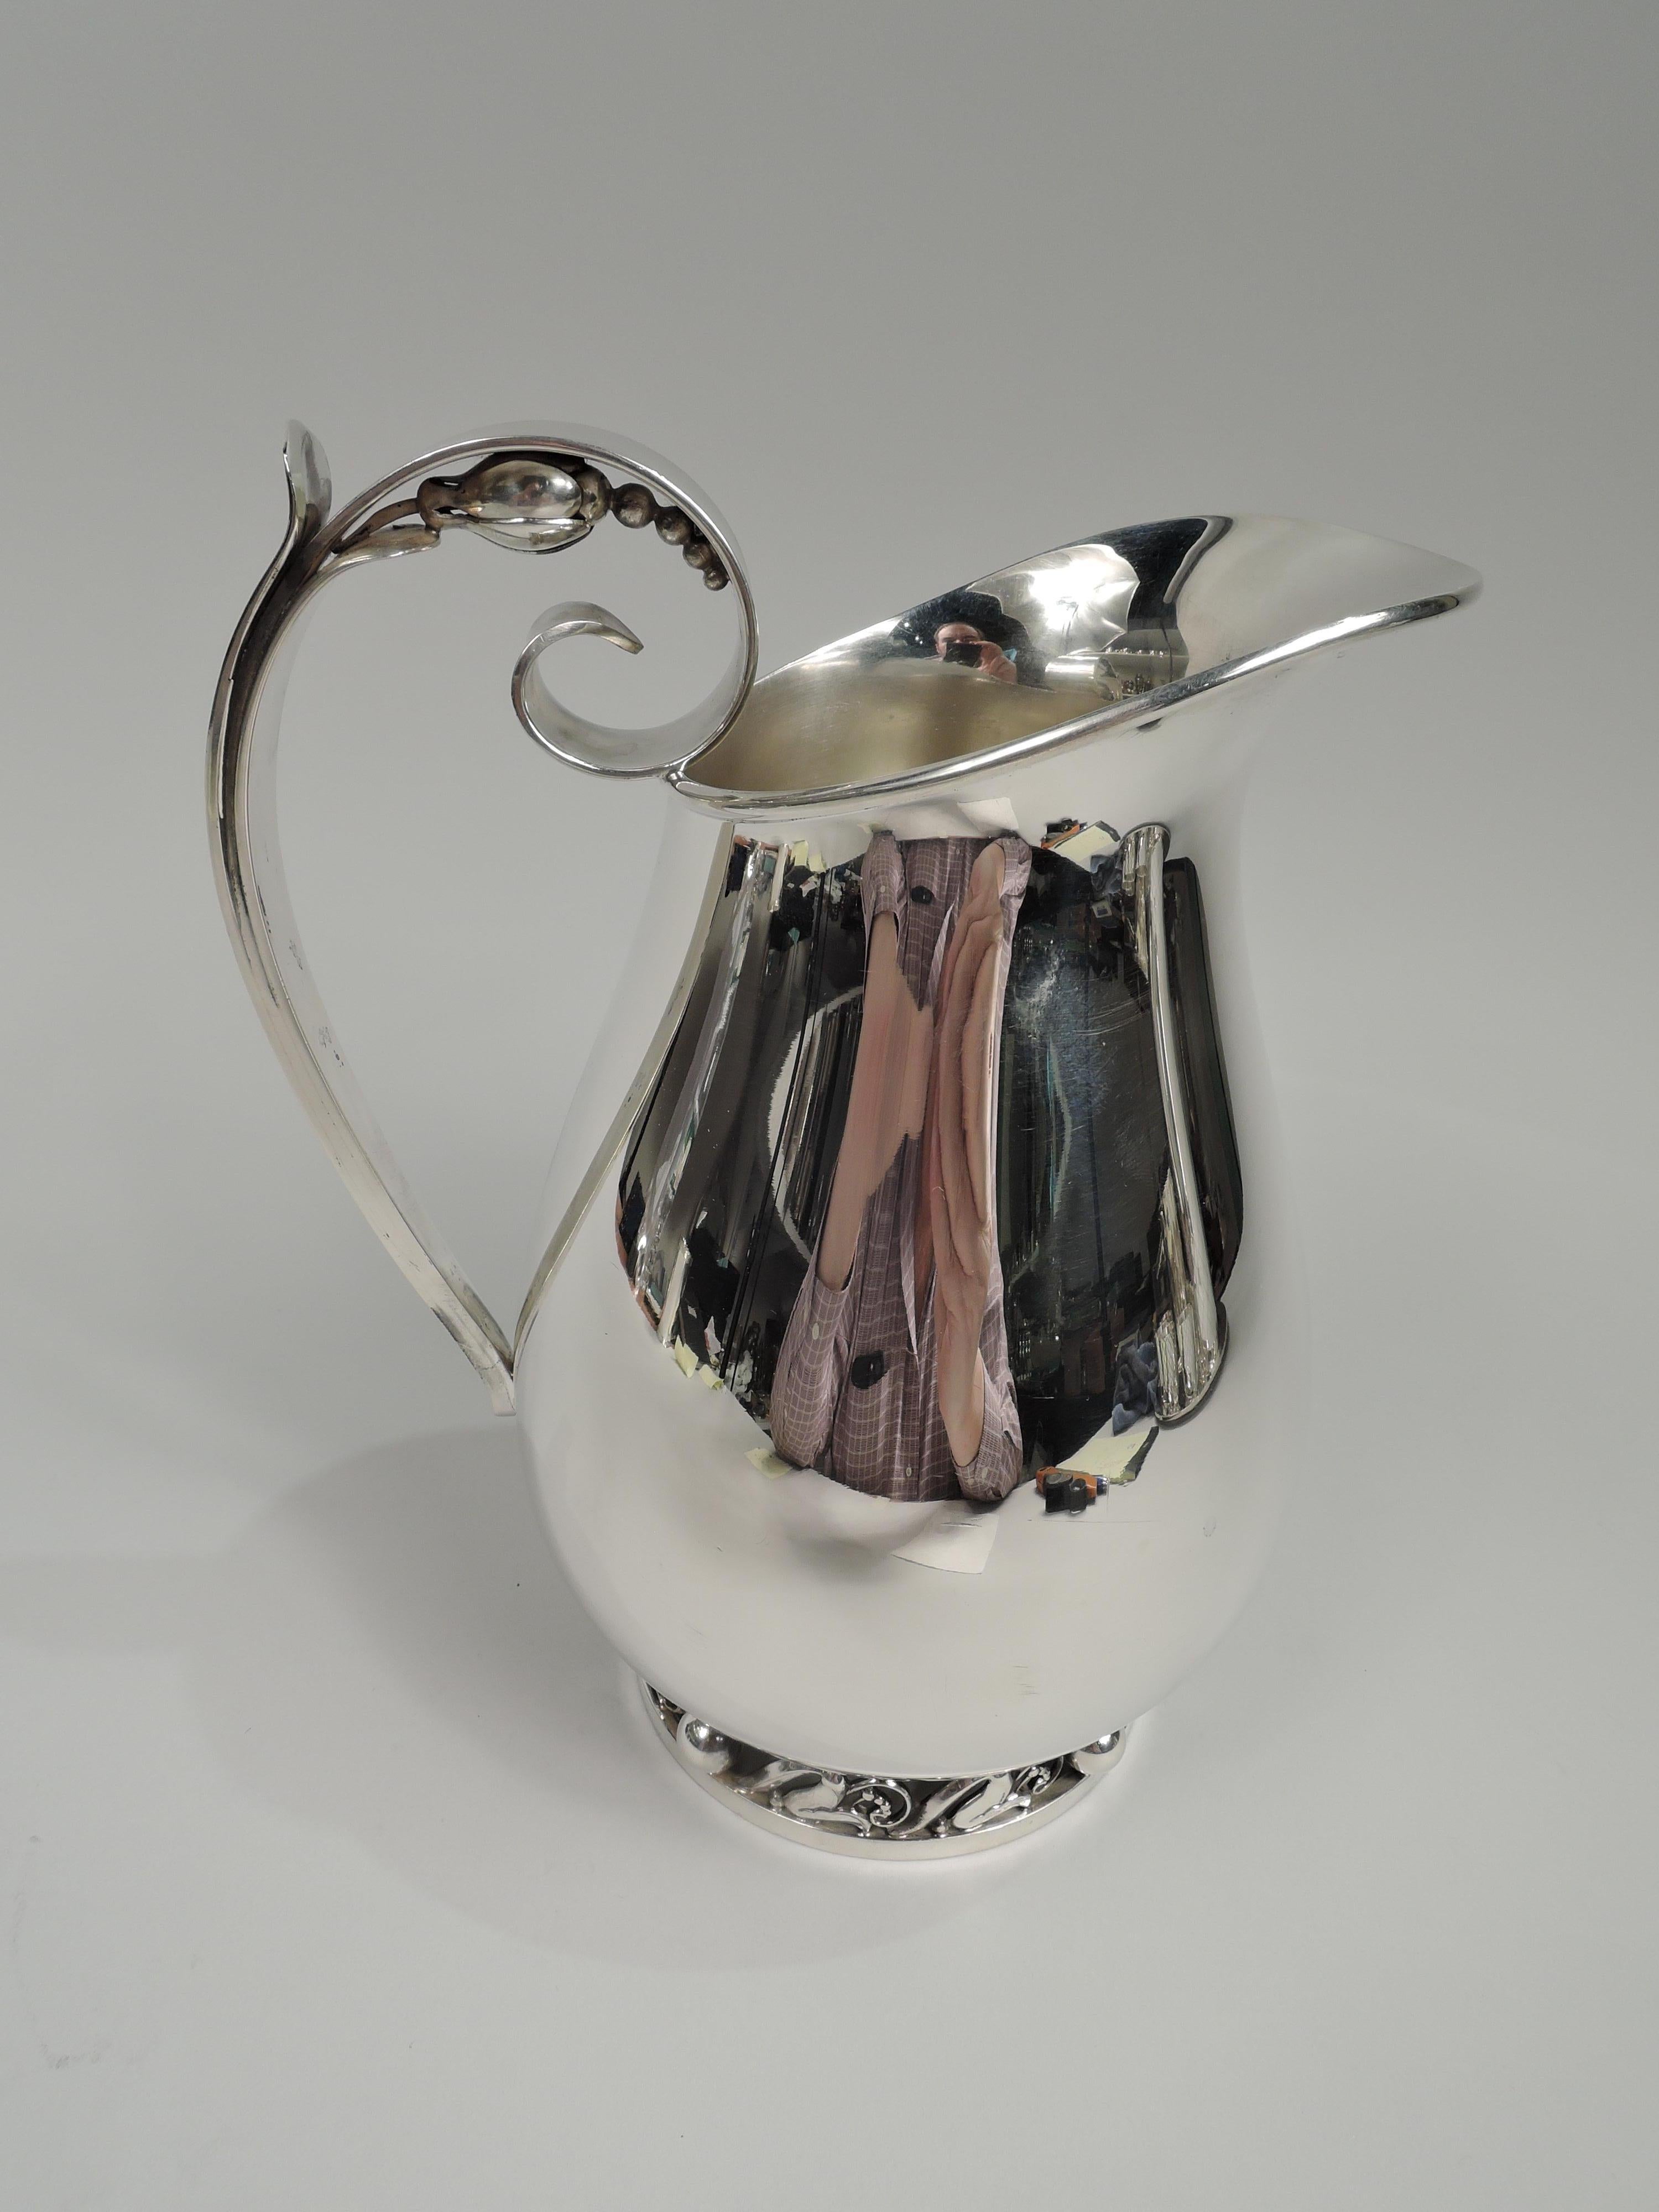 Mid-Century Modern sterling silver water pitcher. Designed by Alphonse La Paglia (d. 1953) for International Silver Co. in Meriden, Conn. Baluster with helmet mouth. Capped high-looping handle with volute-scroll terminal mounted with Blossom-style